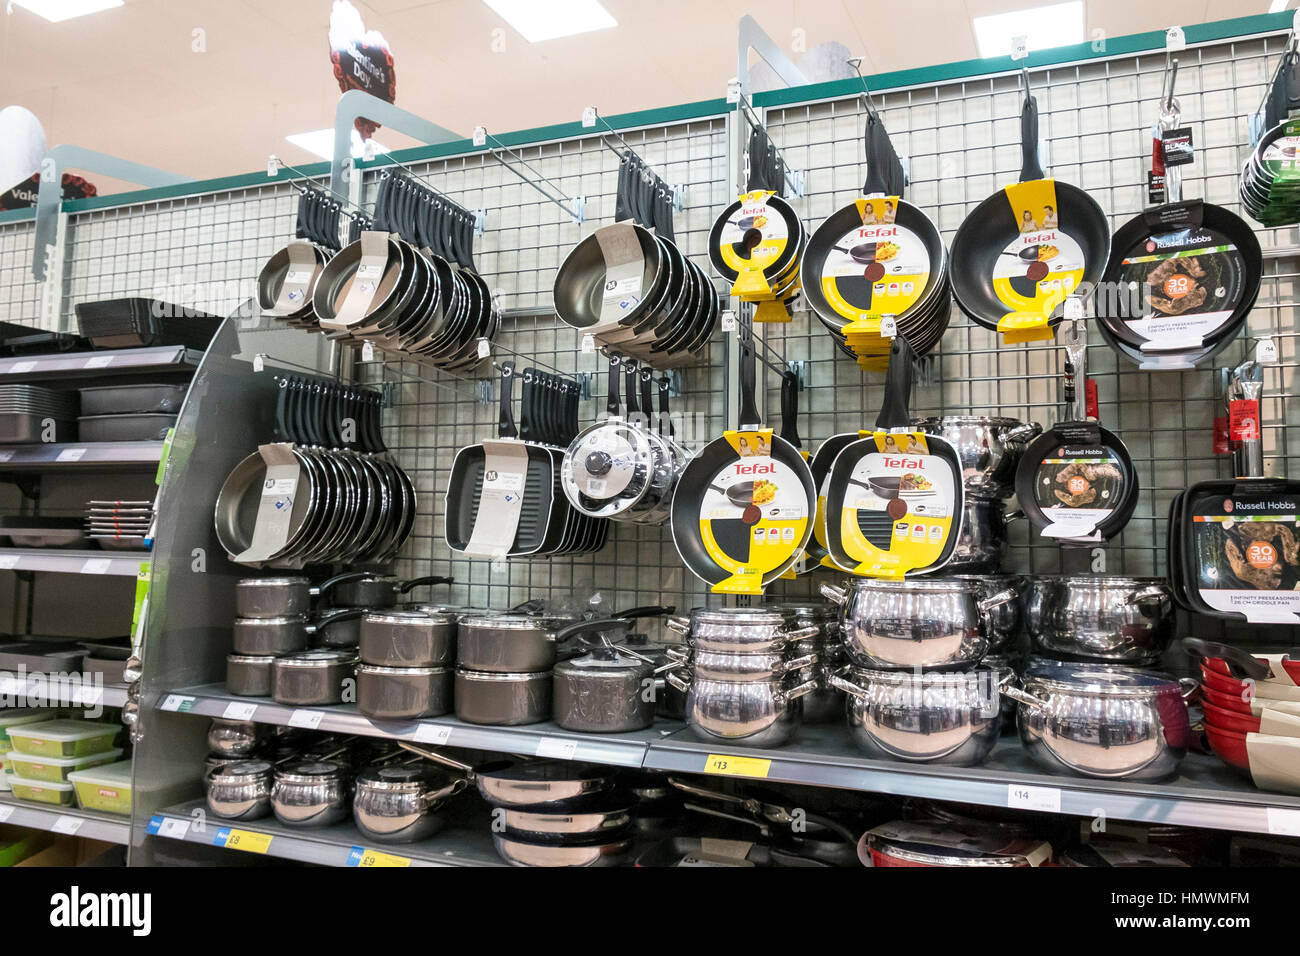 A display of kitchen utensils on sale inside a Morrisons supermarket Stock  Photo - Alamy